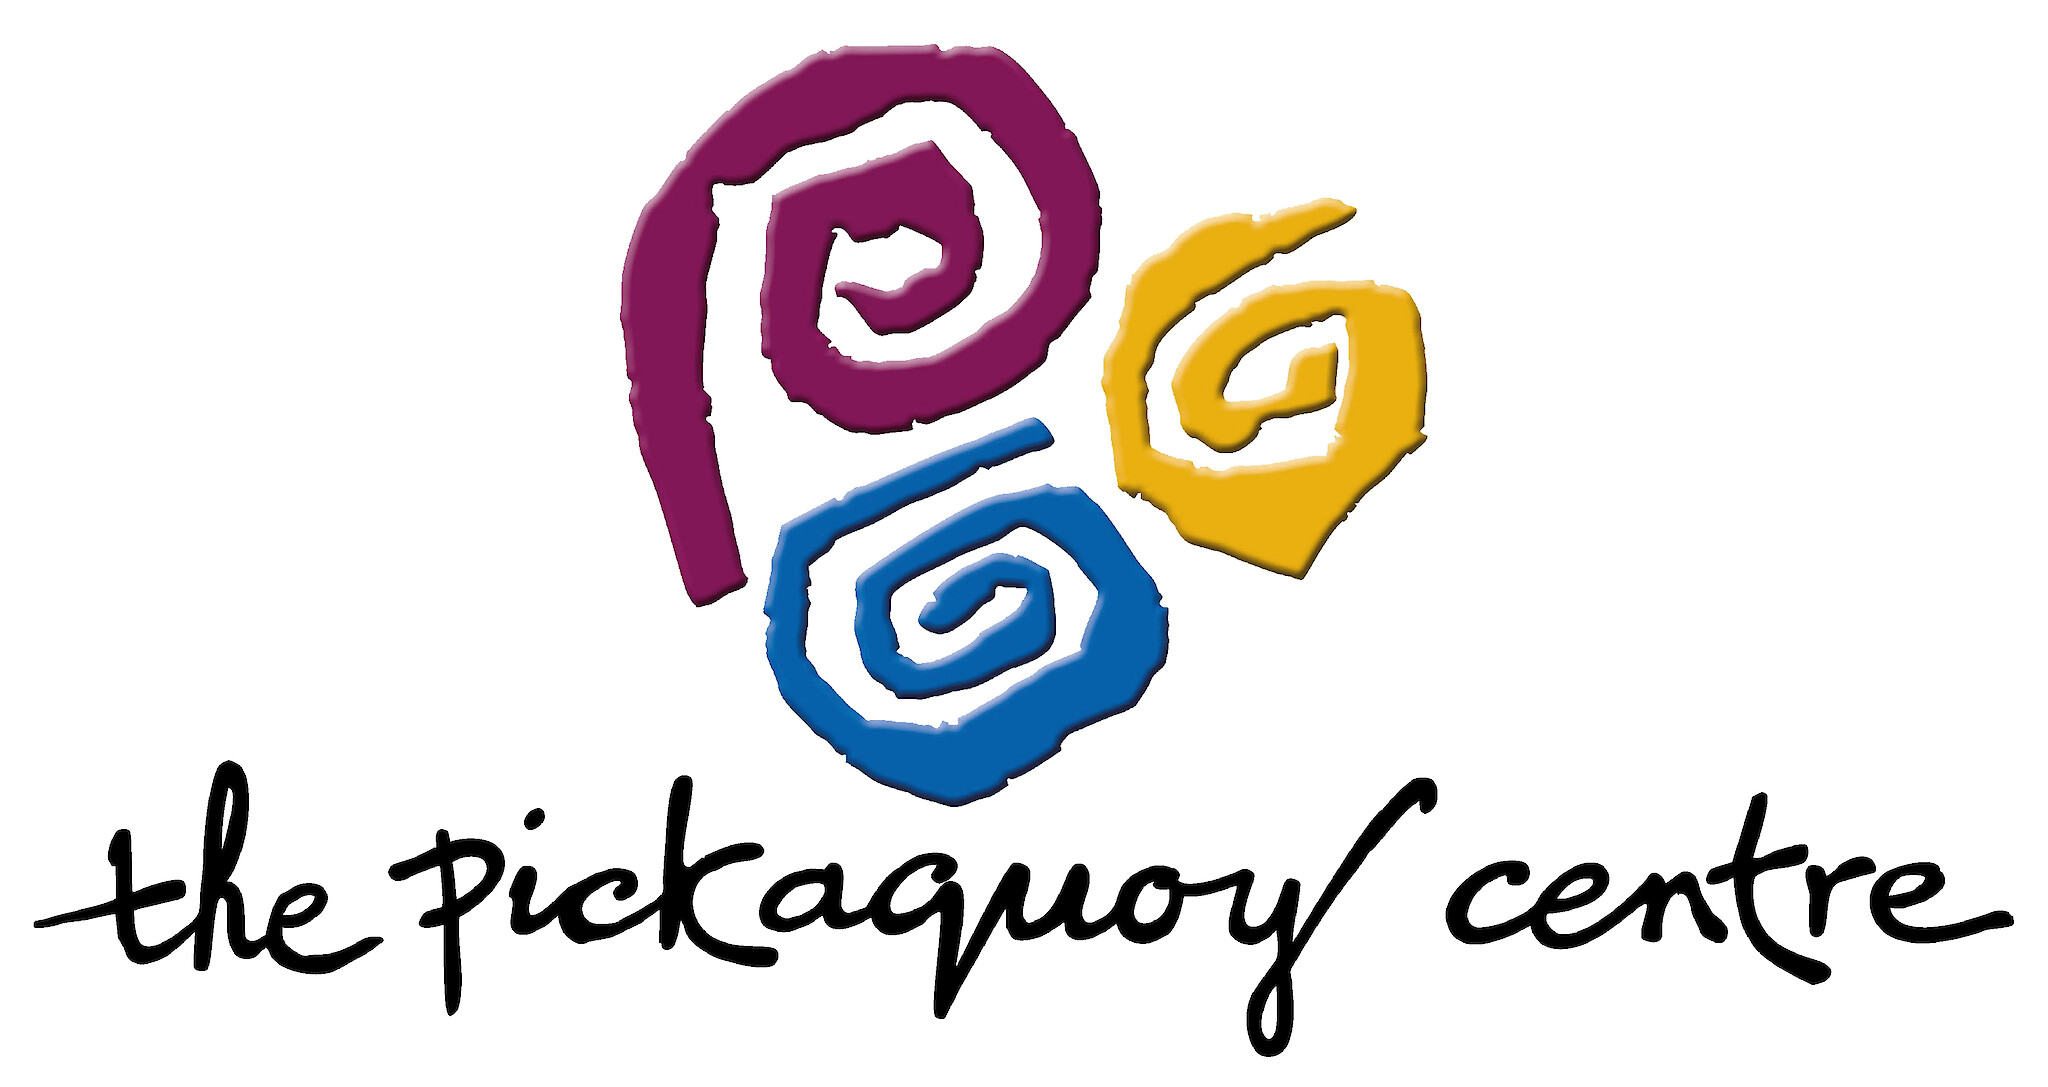 The Pickaquoy Centre Logo